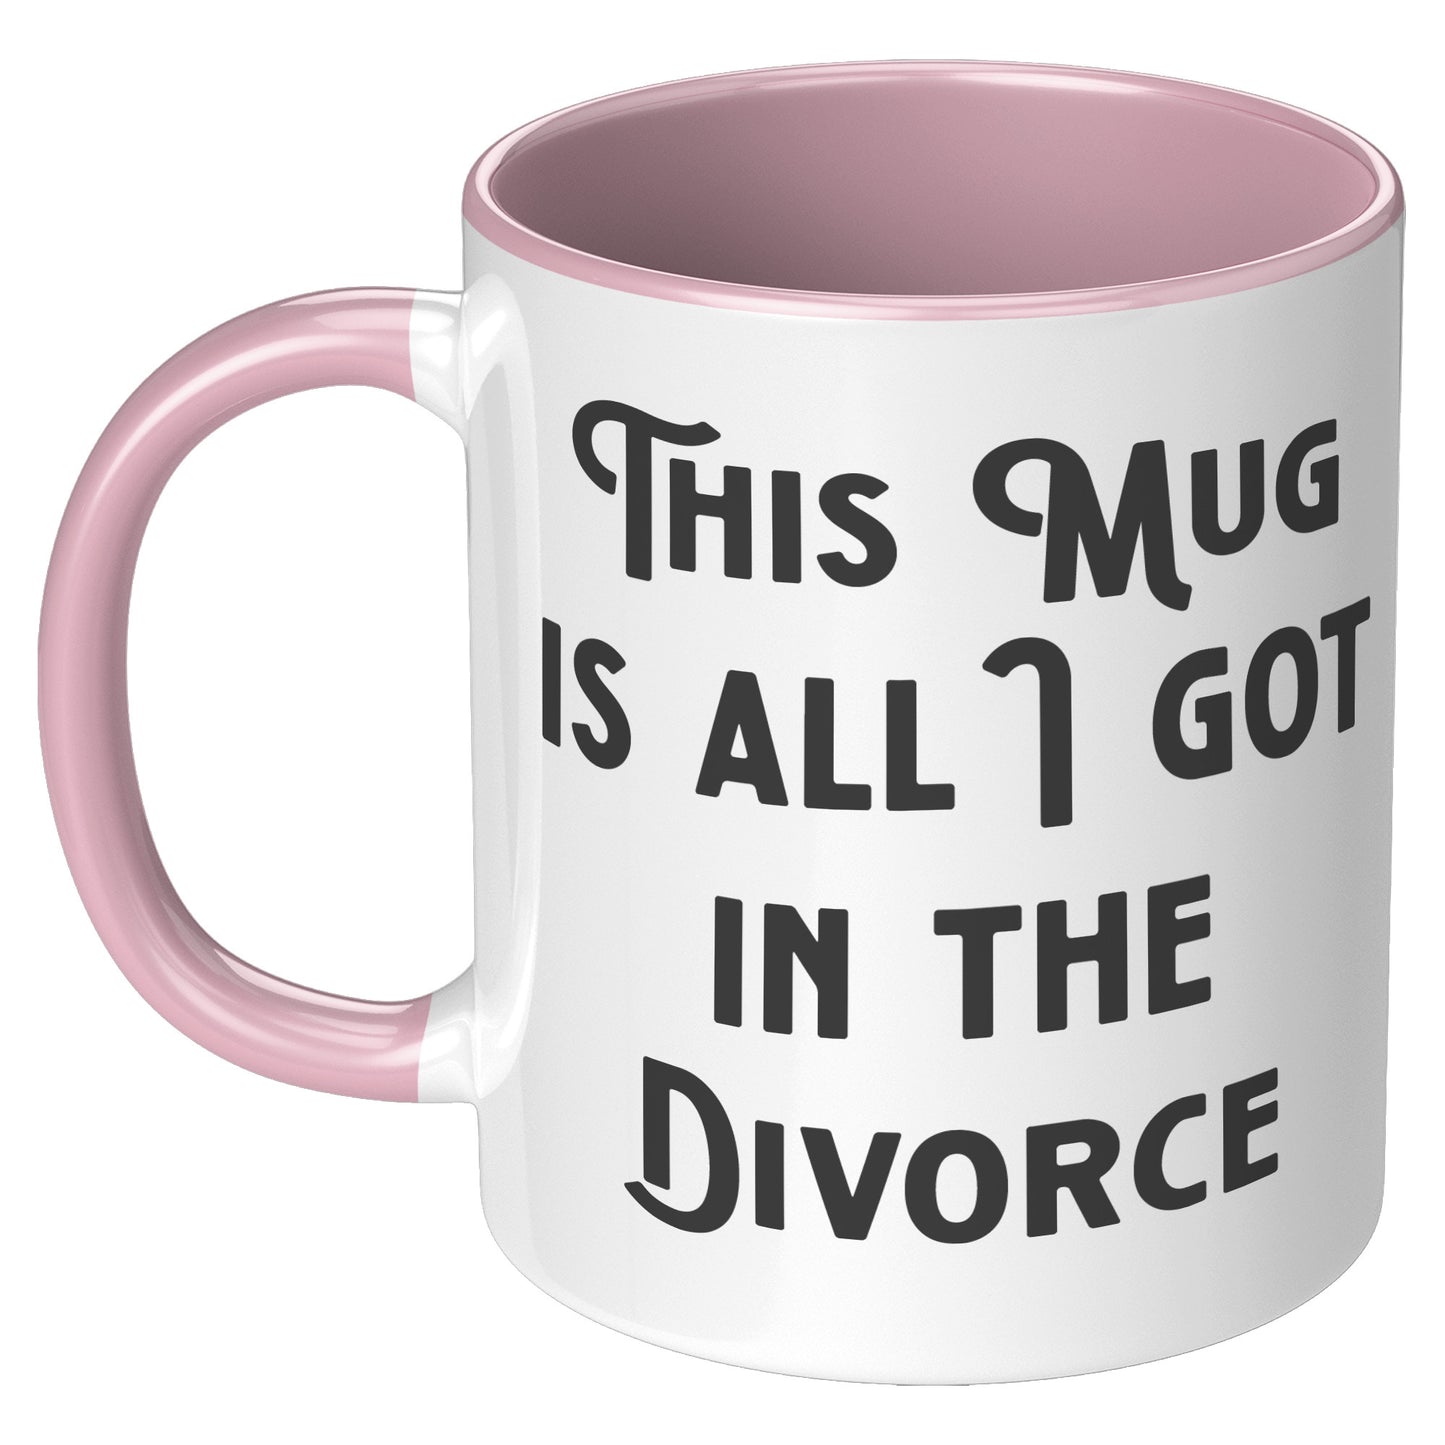 THIS MUG IS ALL I GOT IN THE DIVORCE